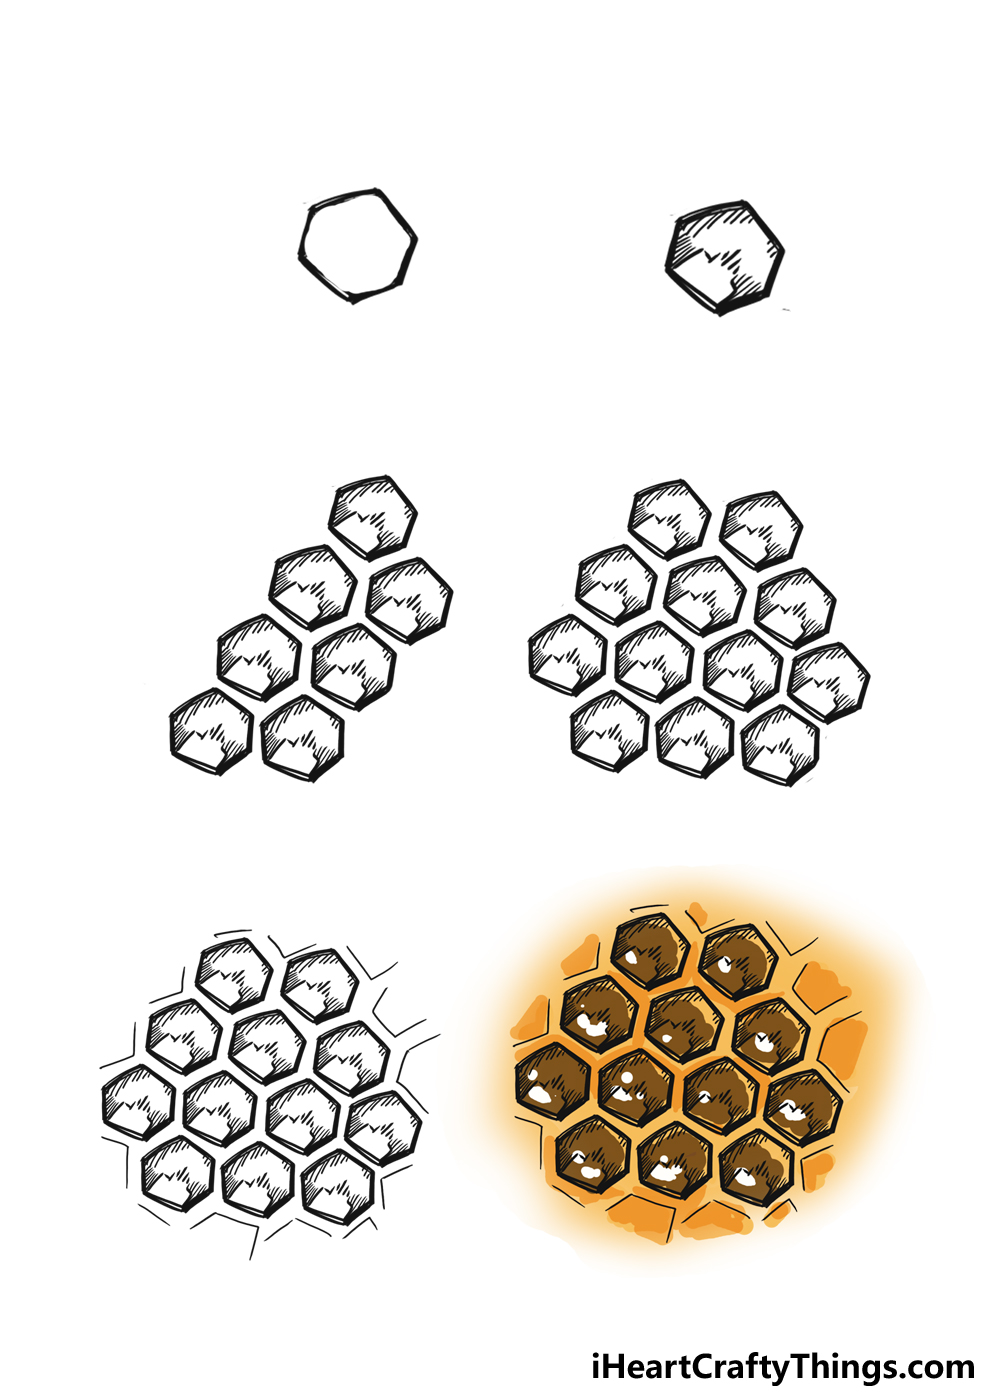 How to Draw A Honeycomb